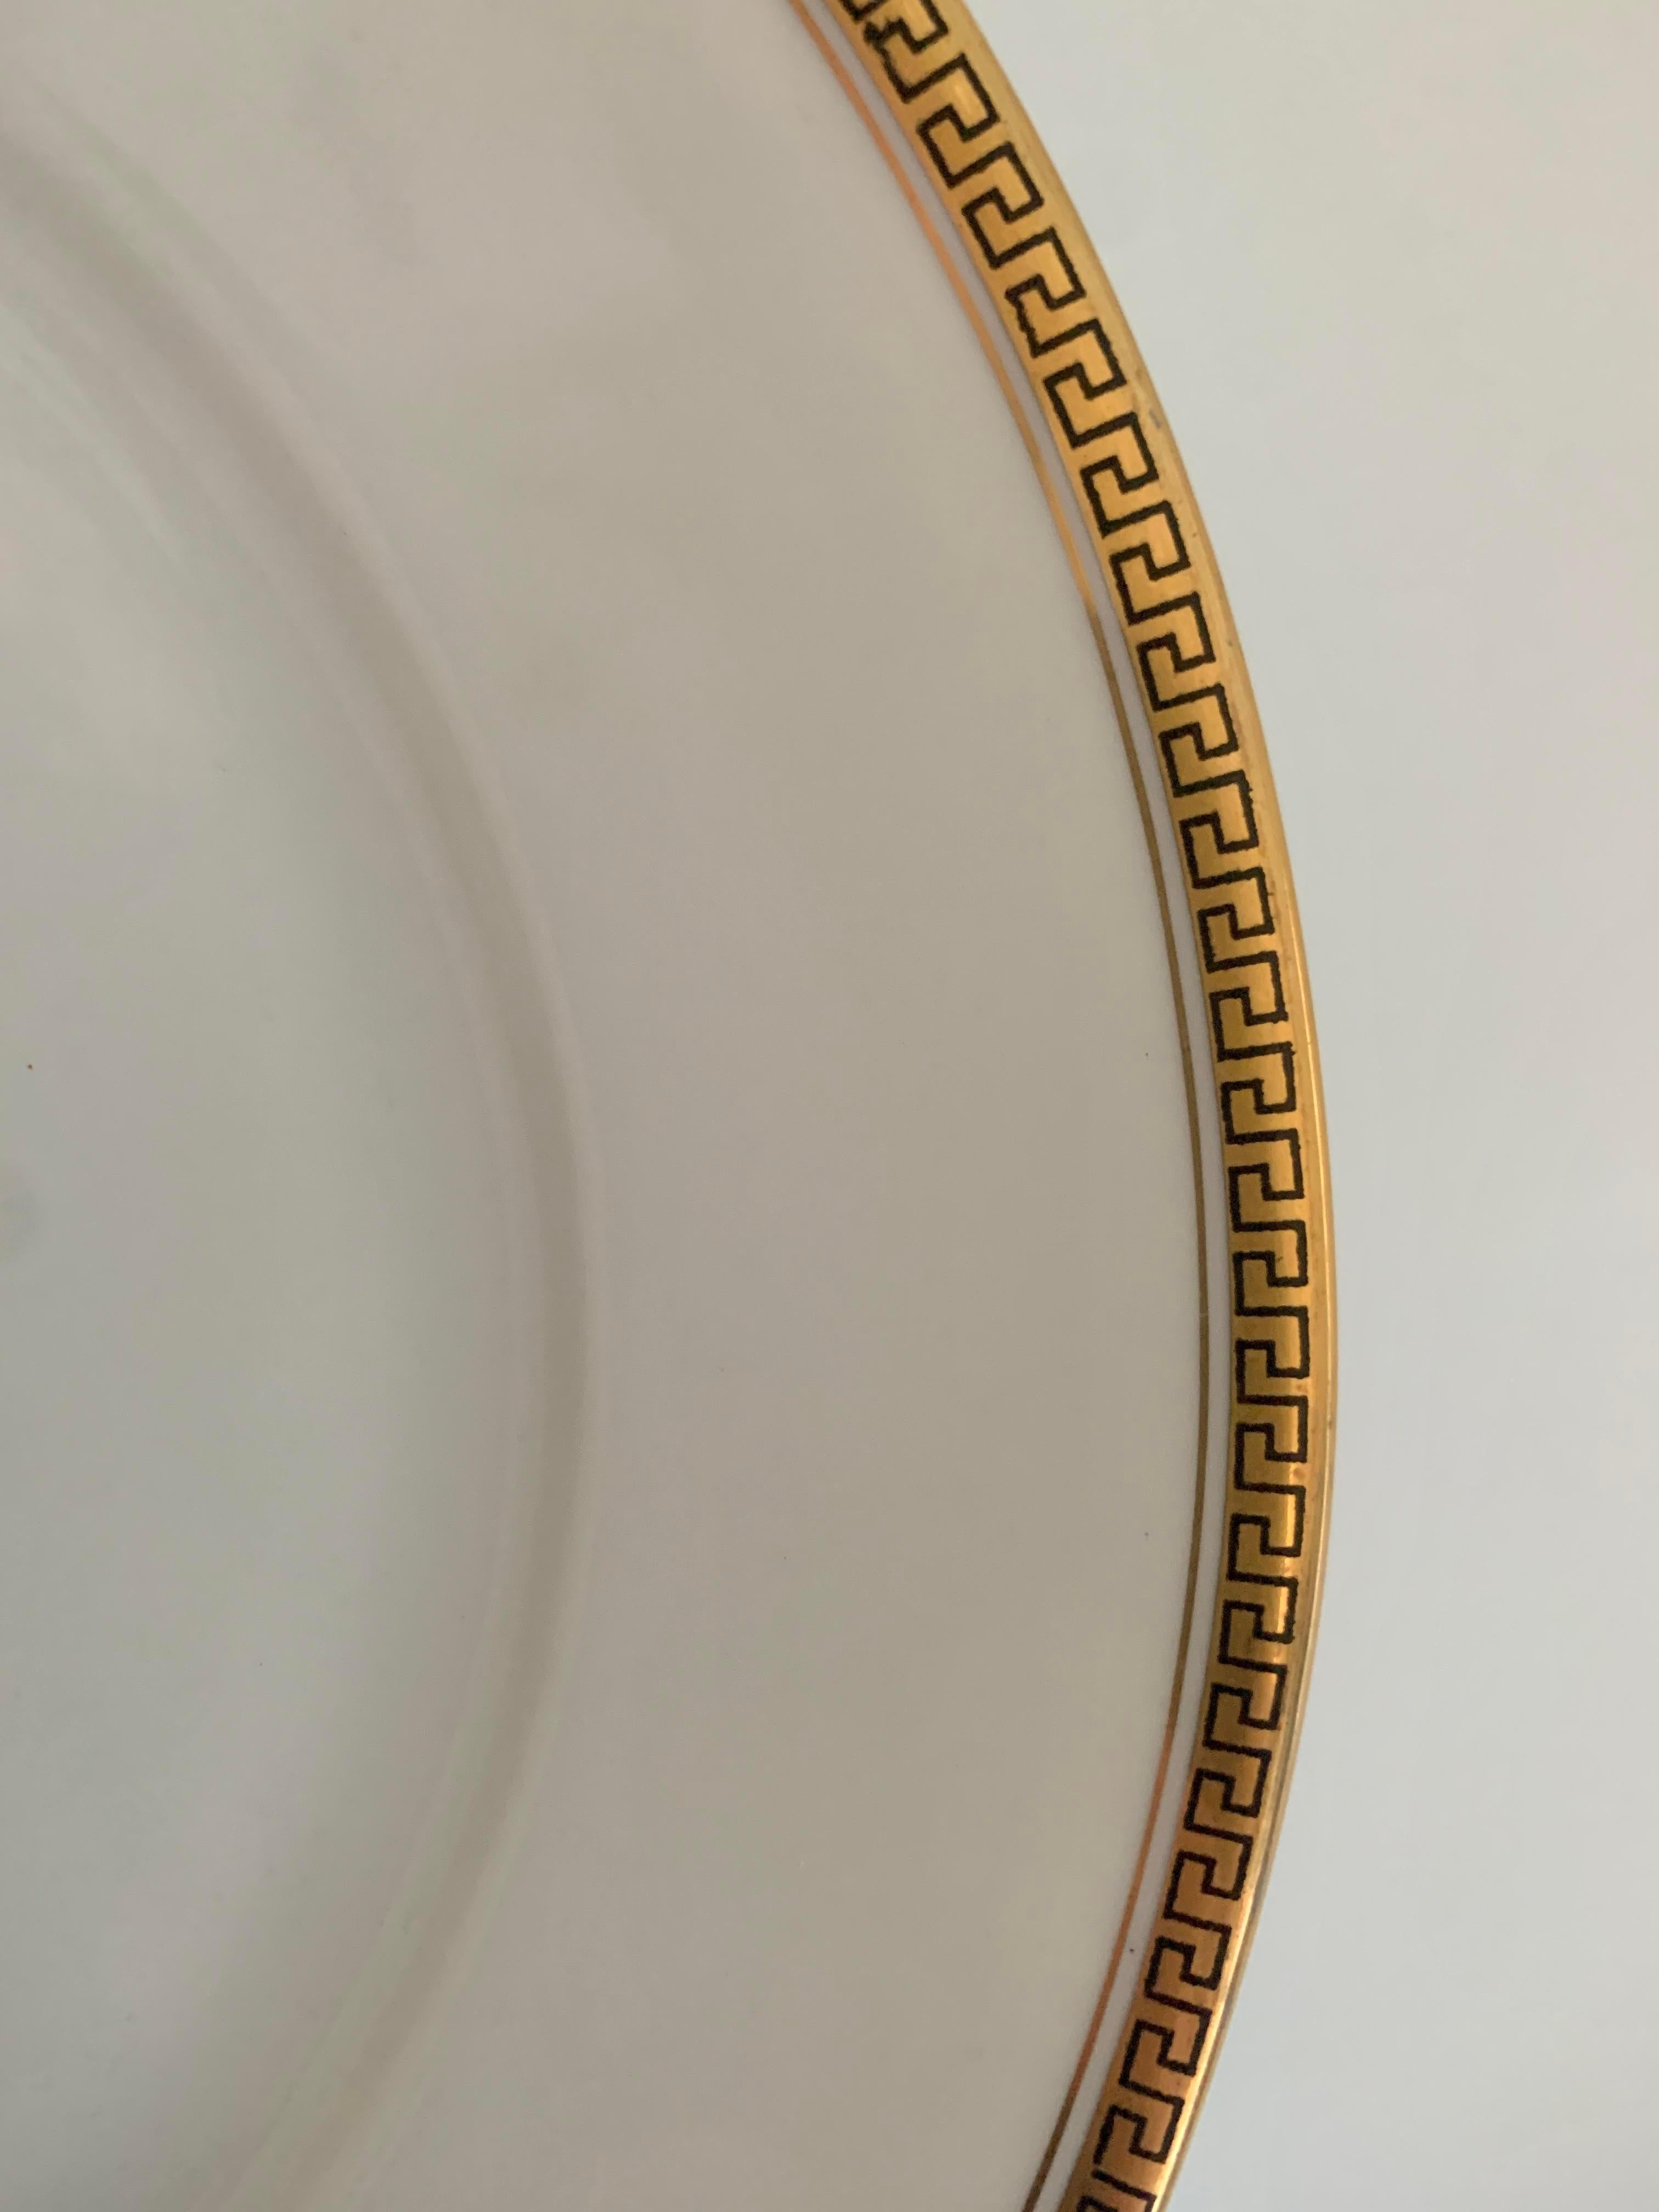 Neoclassical Antique German Greek Key Rimmed Luncheon Plates by Kpm, 1920s For Sale